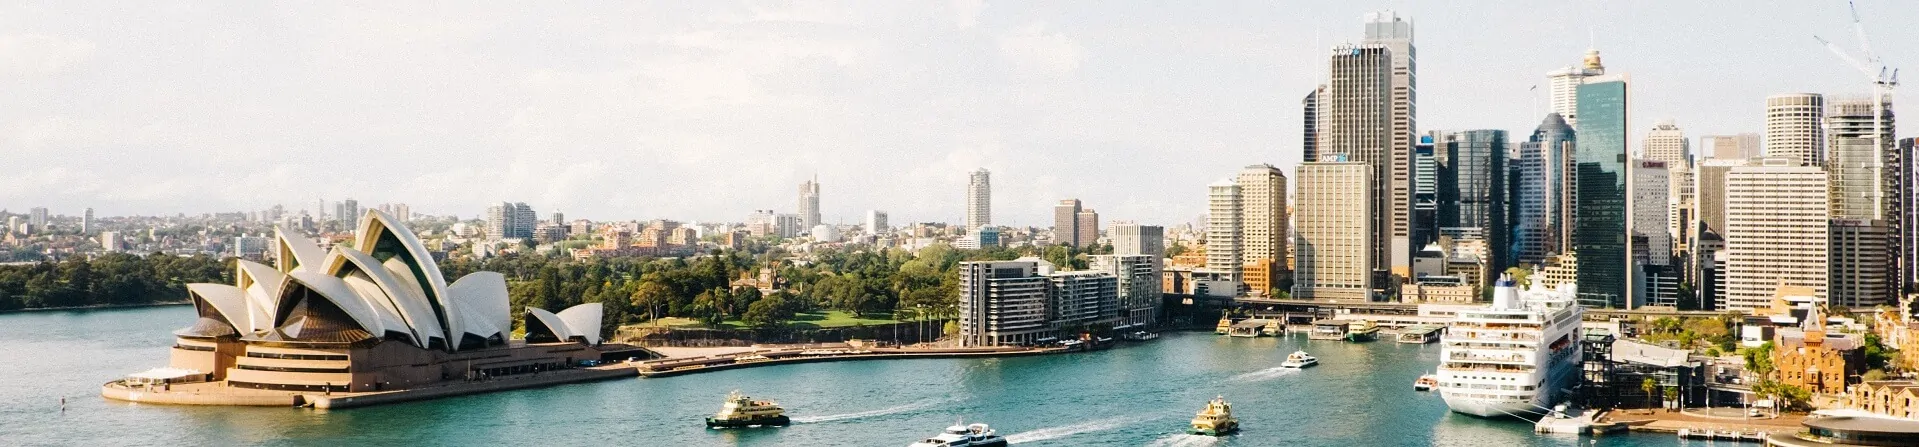 What are 10 interesting facts about Sydney?